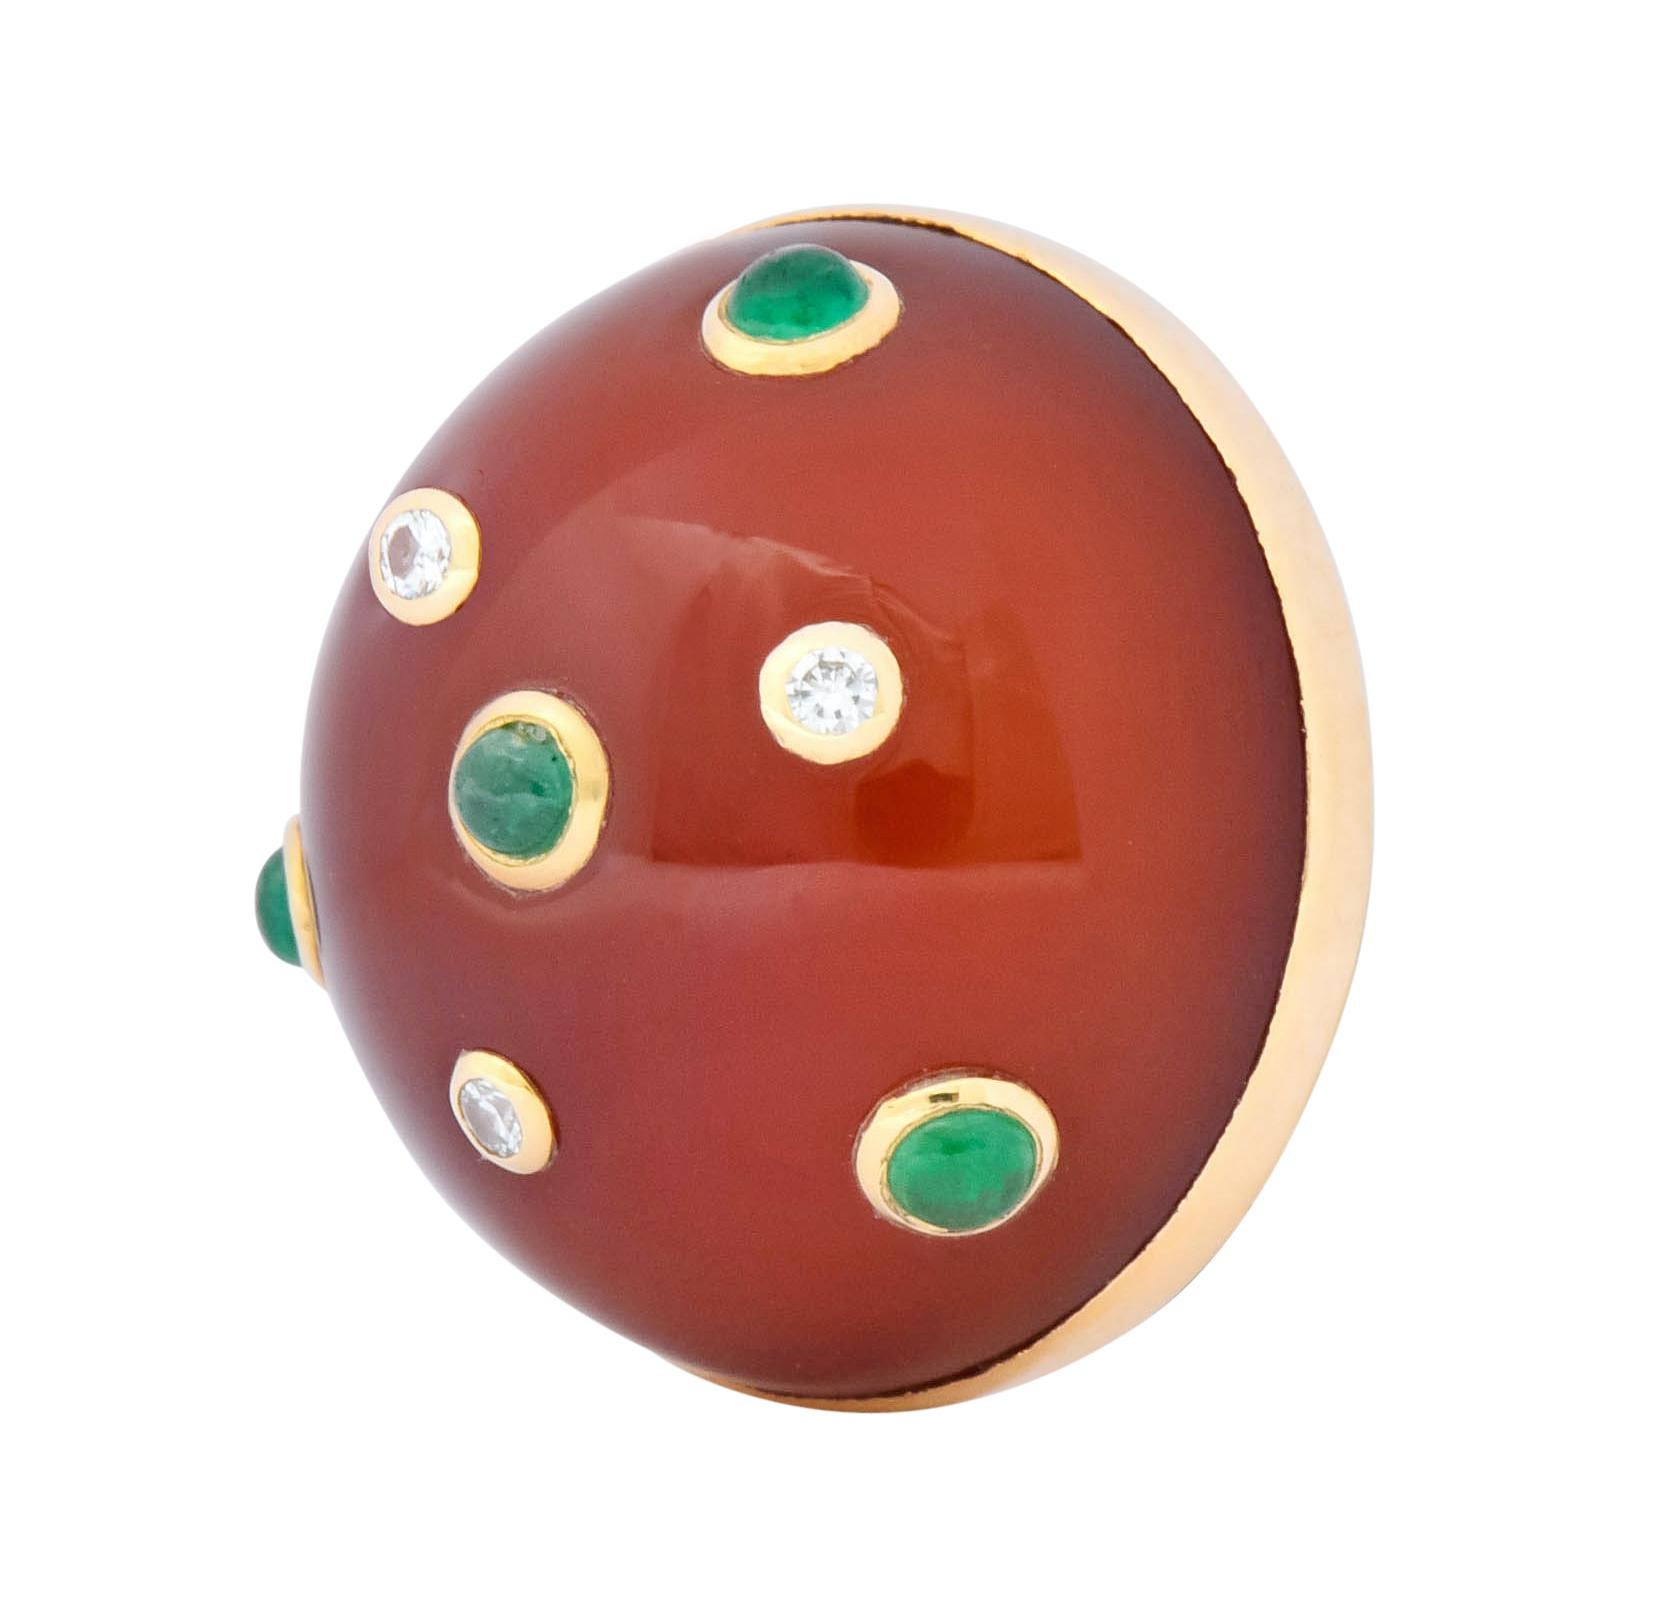 Earrings designed as round domes comprised of brick red carnelian bezel set in a polished gold surround

Accented by round emerald cabochons measuring approximately 2.2 mm, translucent and bright green in color

With bezel set Swiss cut diamonds